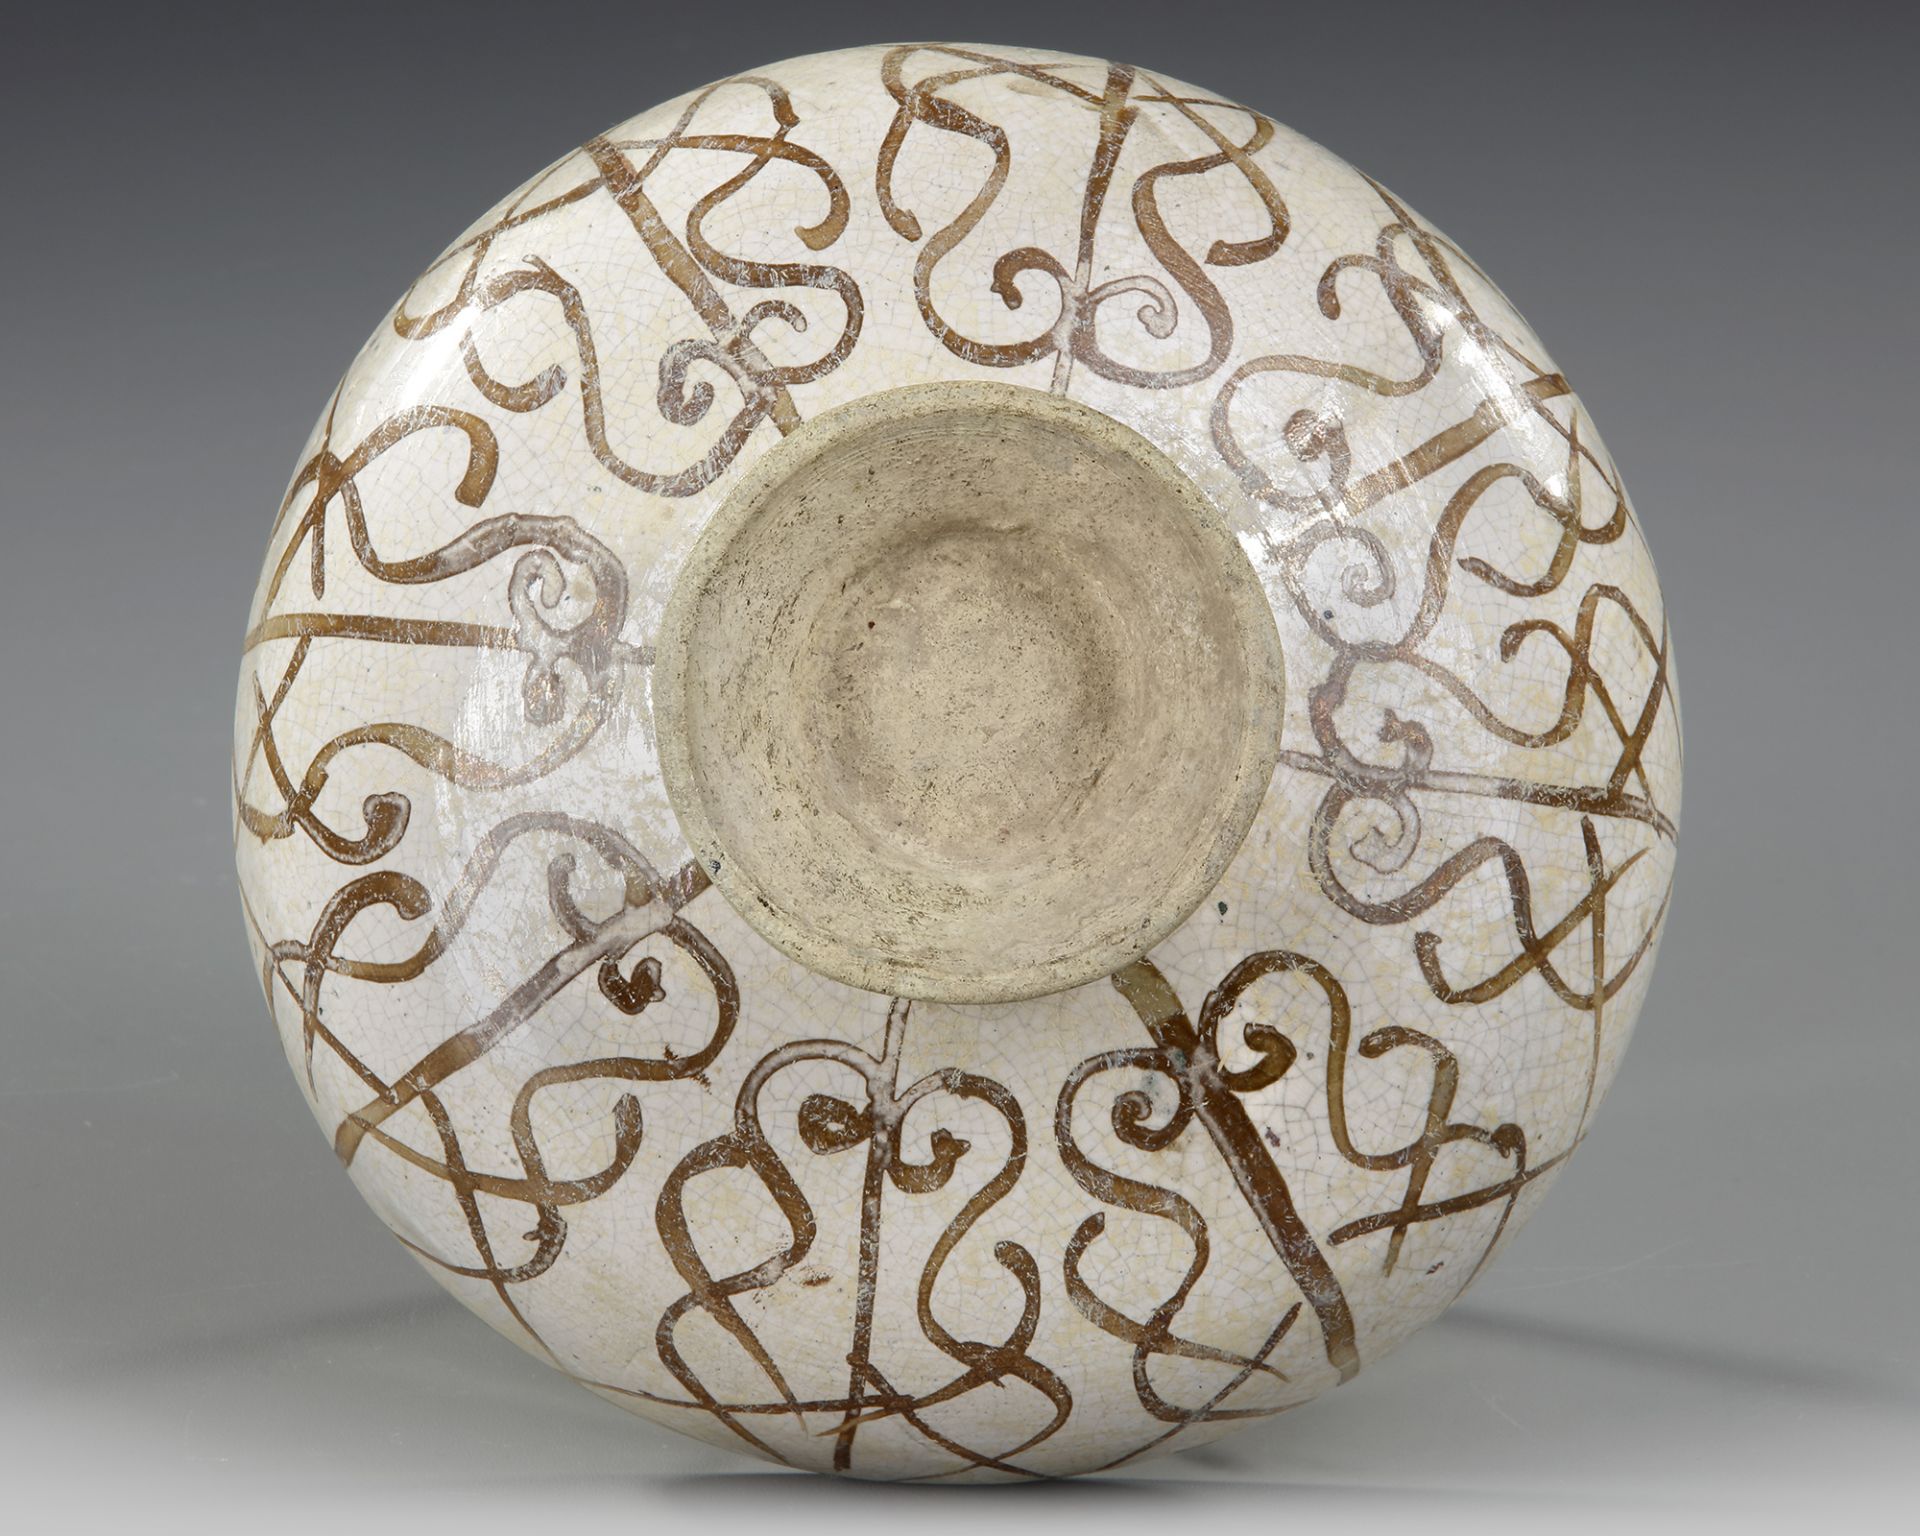 A KASHAN LUSTRE POTTERY BOWL, PERSIA, LATE 12TH - EARLY 13TH CENTURY - Image 3 of 8